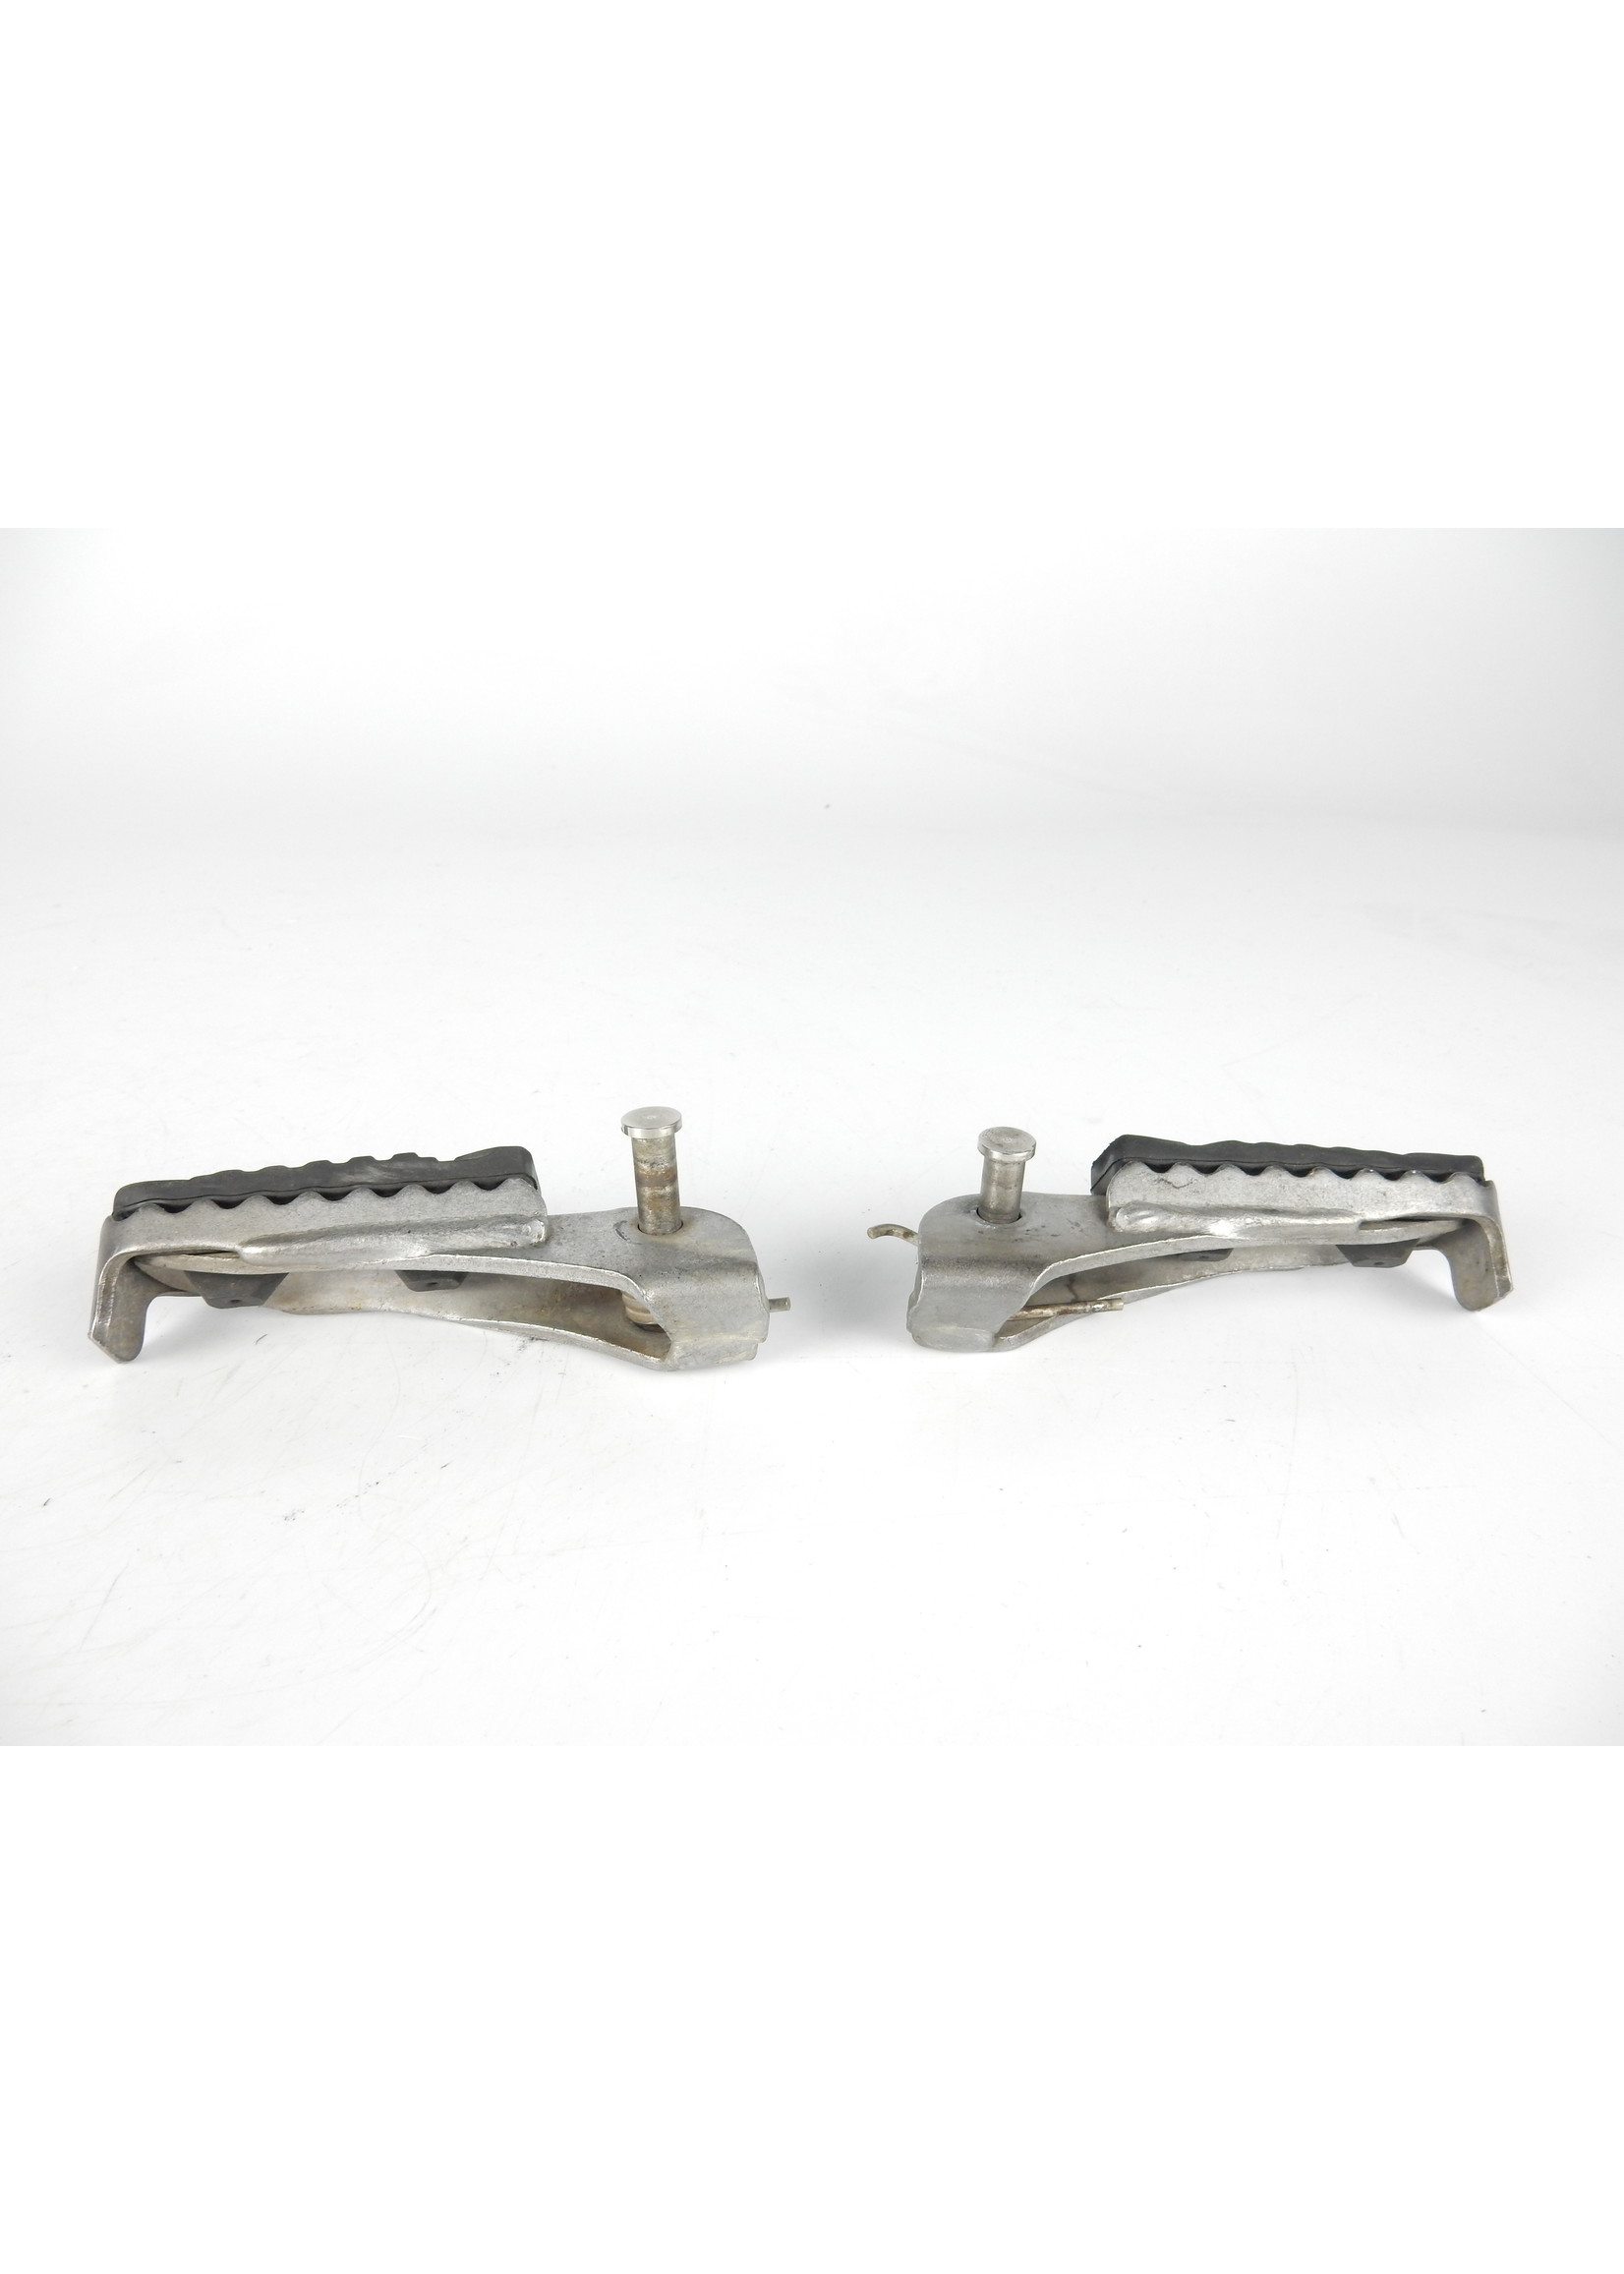 BMW BMW F 850 GS Footrest, left / Footrest, right / Footrest rubber / 46718409415 / 46718409416 / 46718530633